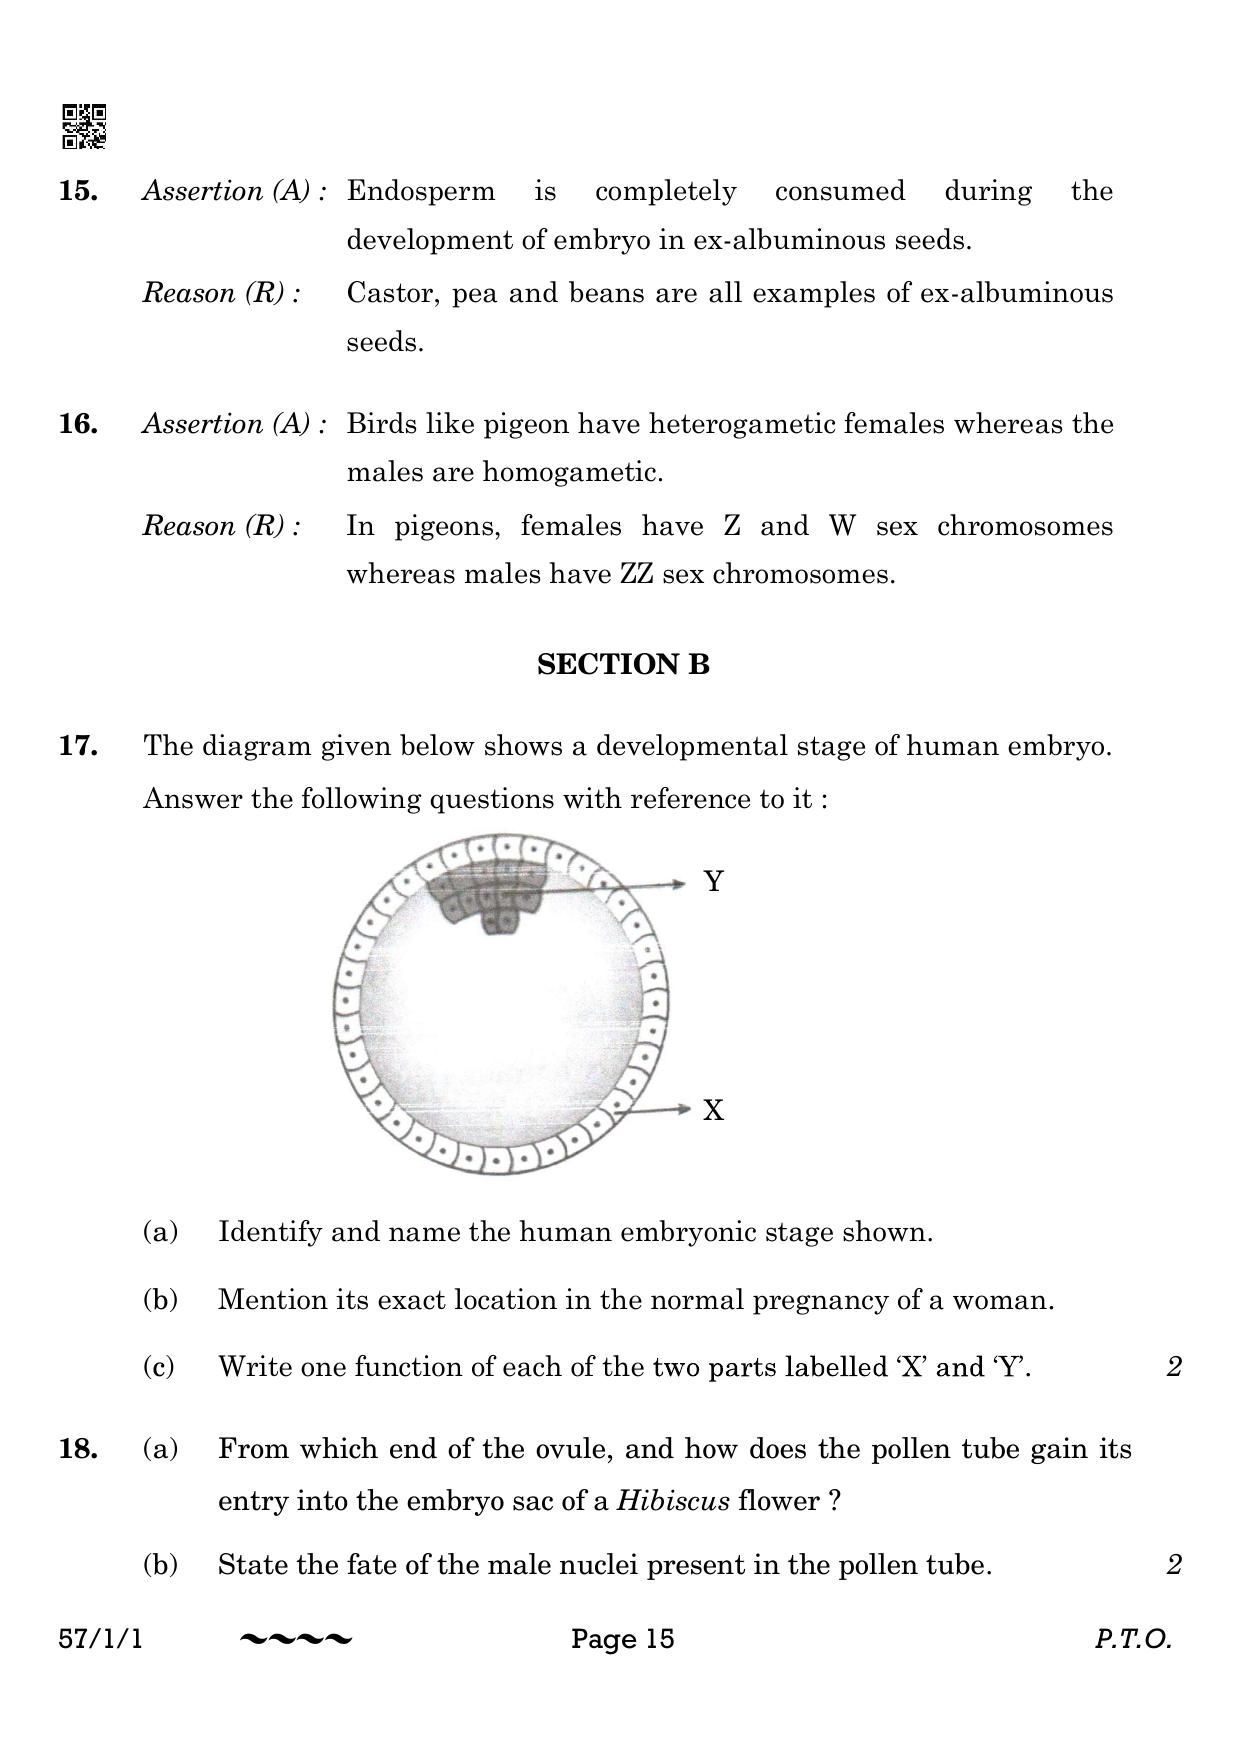 CBSE Class 12 57-1-1 Biology 2023 Question Paper - Page 15